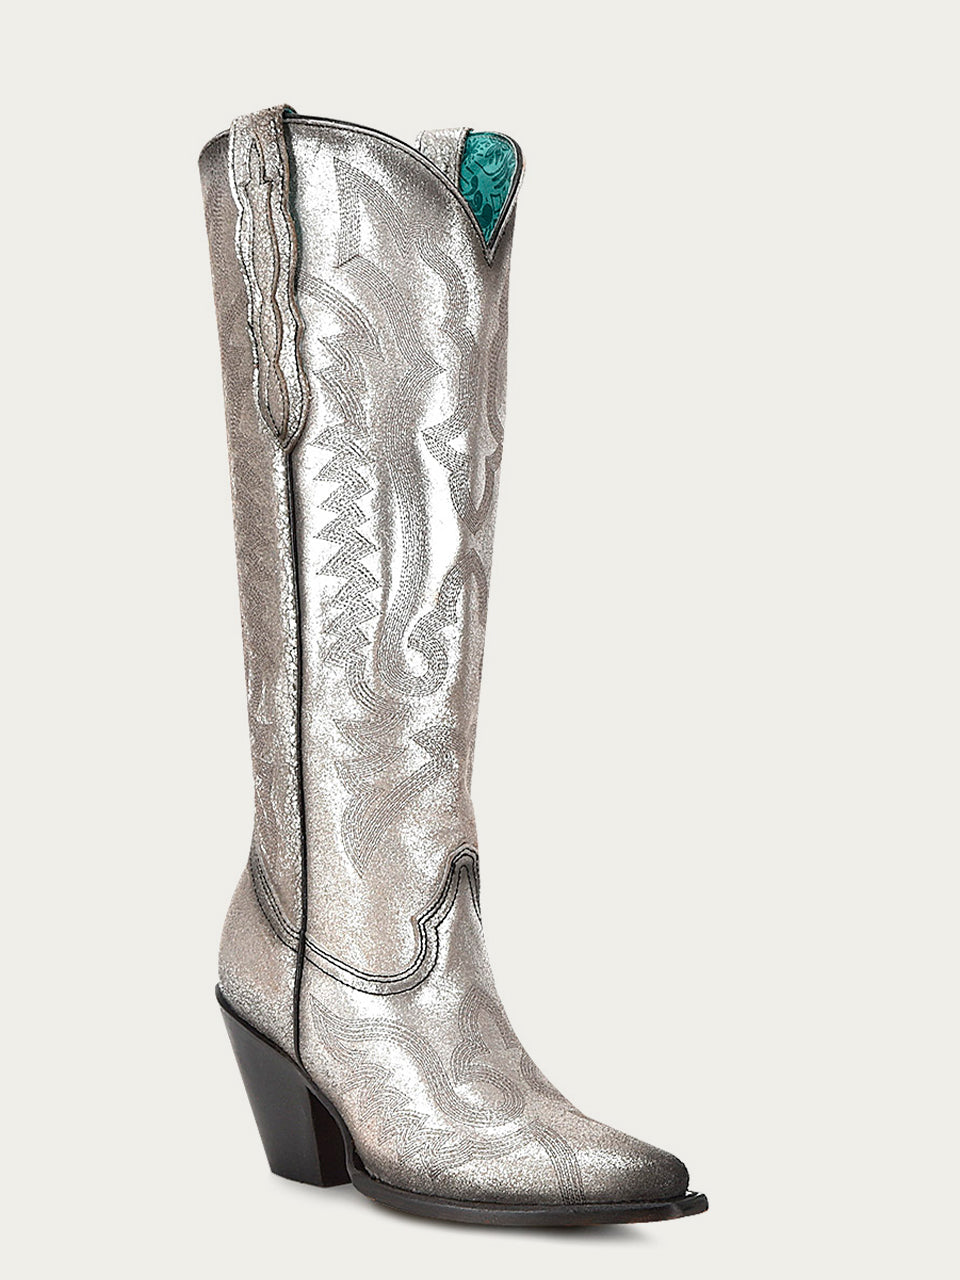 Z5224 - WOMEN'S EMBROIDERY SILVER POINTED TOE COWBOY BOOT